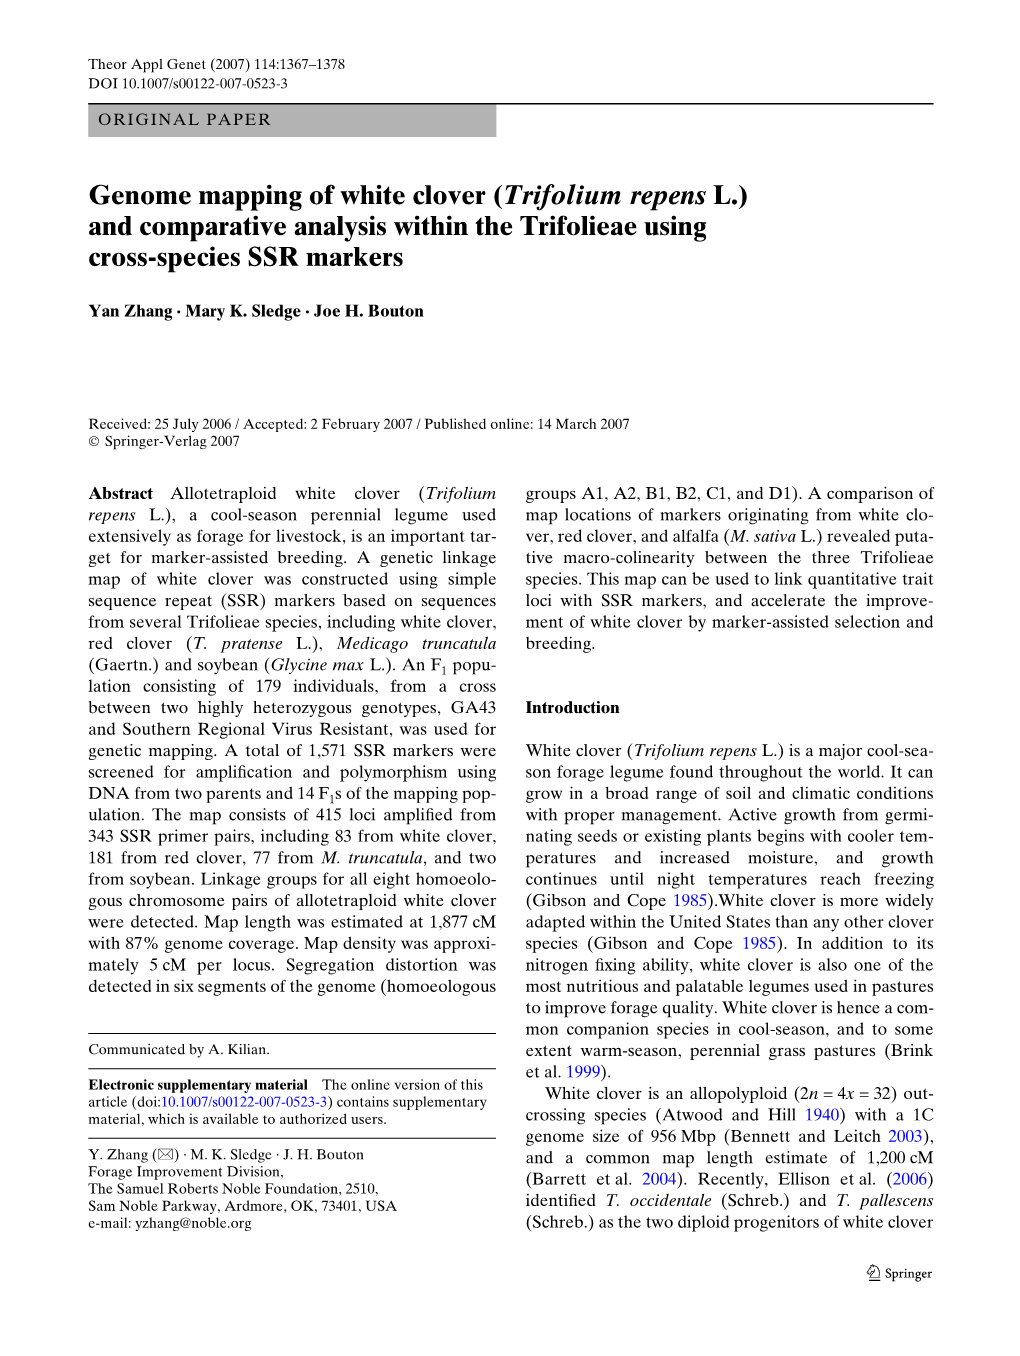 Genome Mapping of White Clover (Trifolium Repens L.) and Comparative Analysis Within the Trifolieae Using Cross-Species SSR Markers